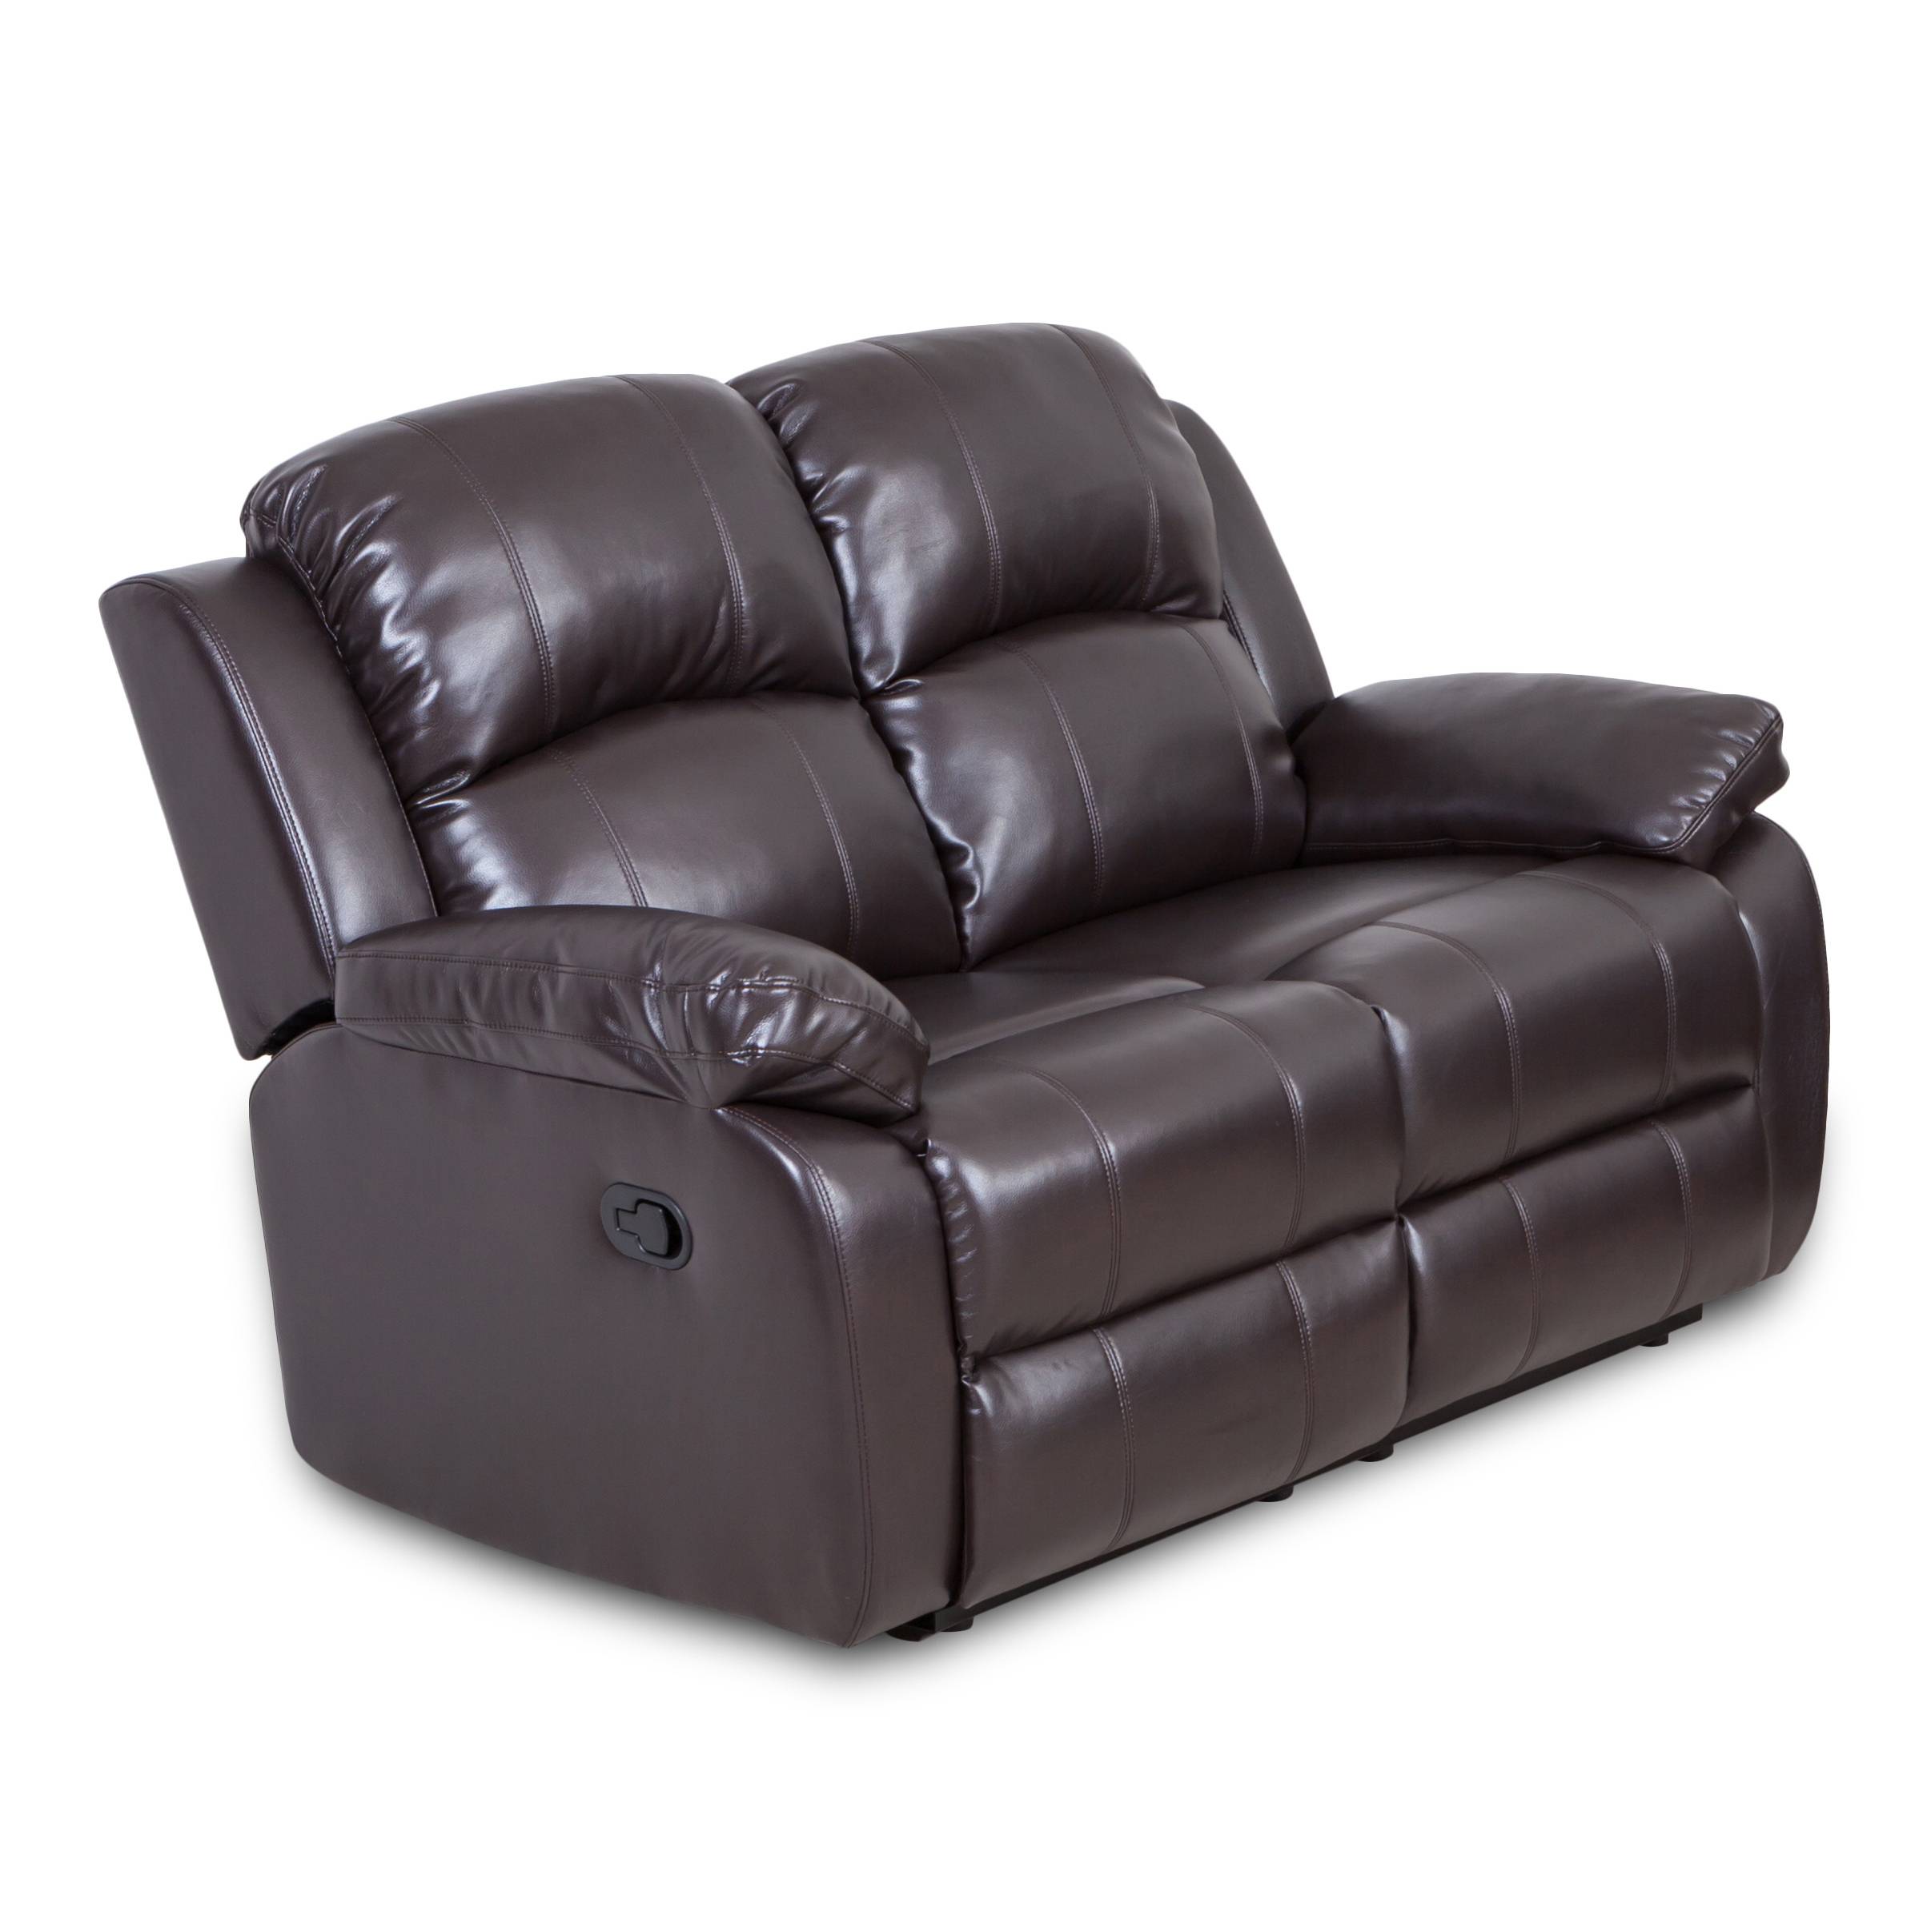 Ready to ship electric recliner sofa leather,living room furniture sofa